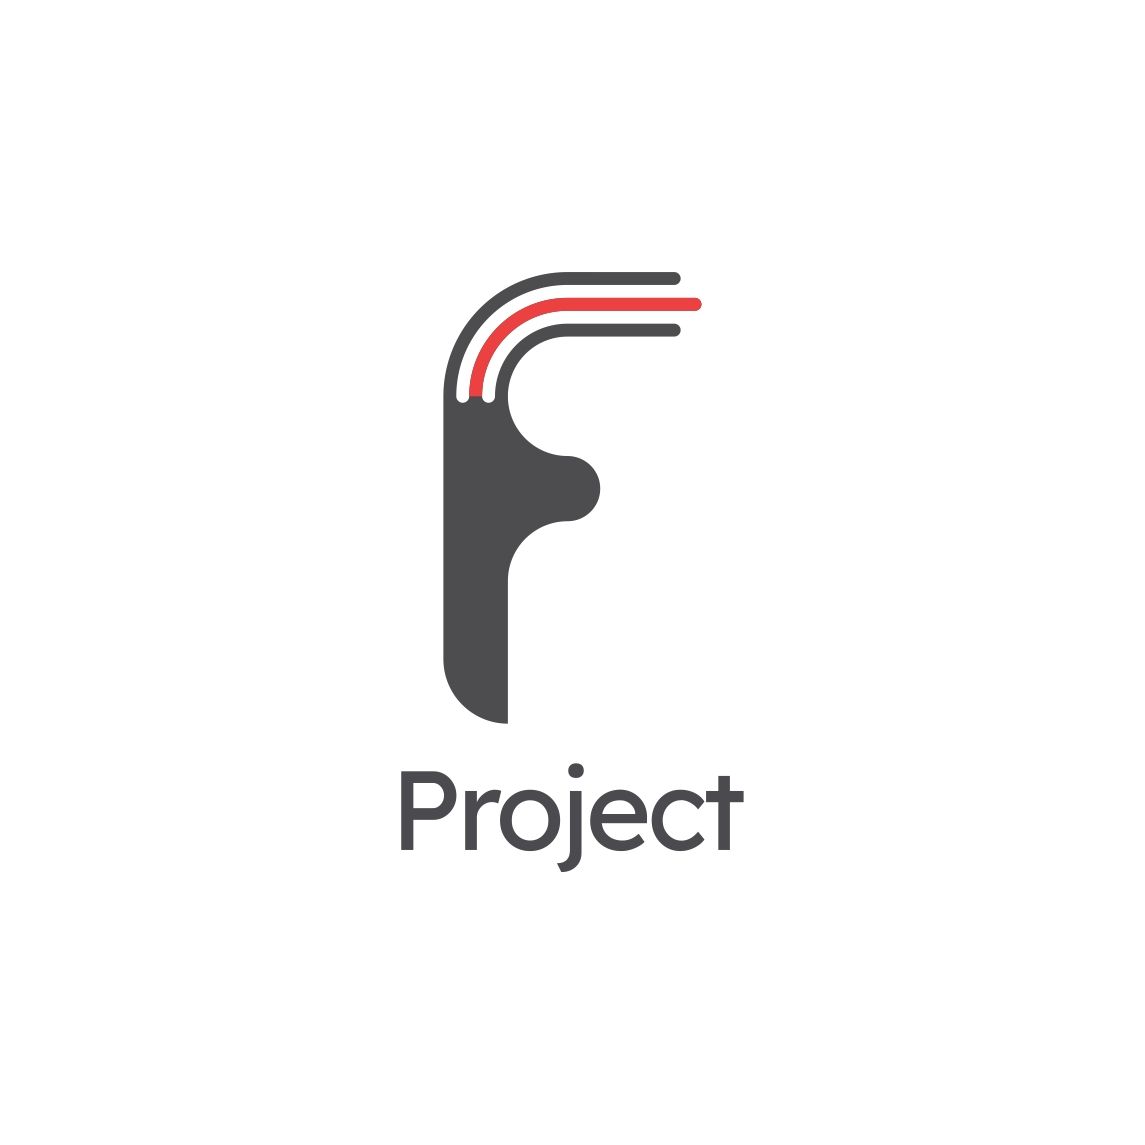 F Project